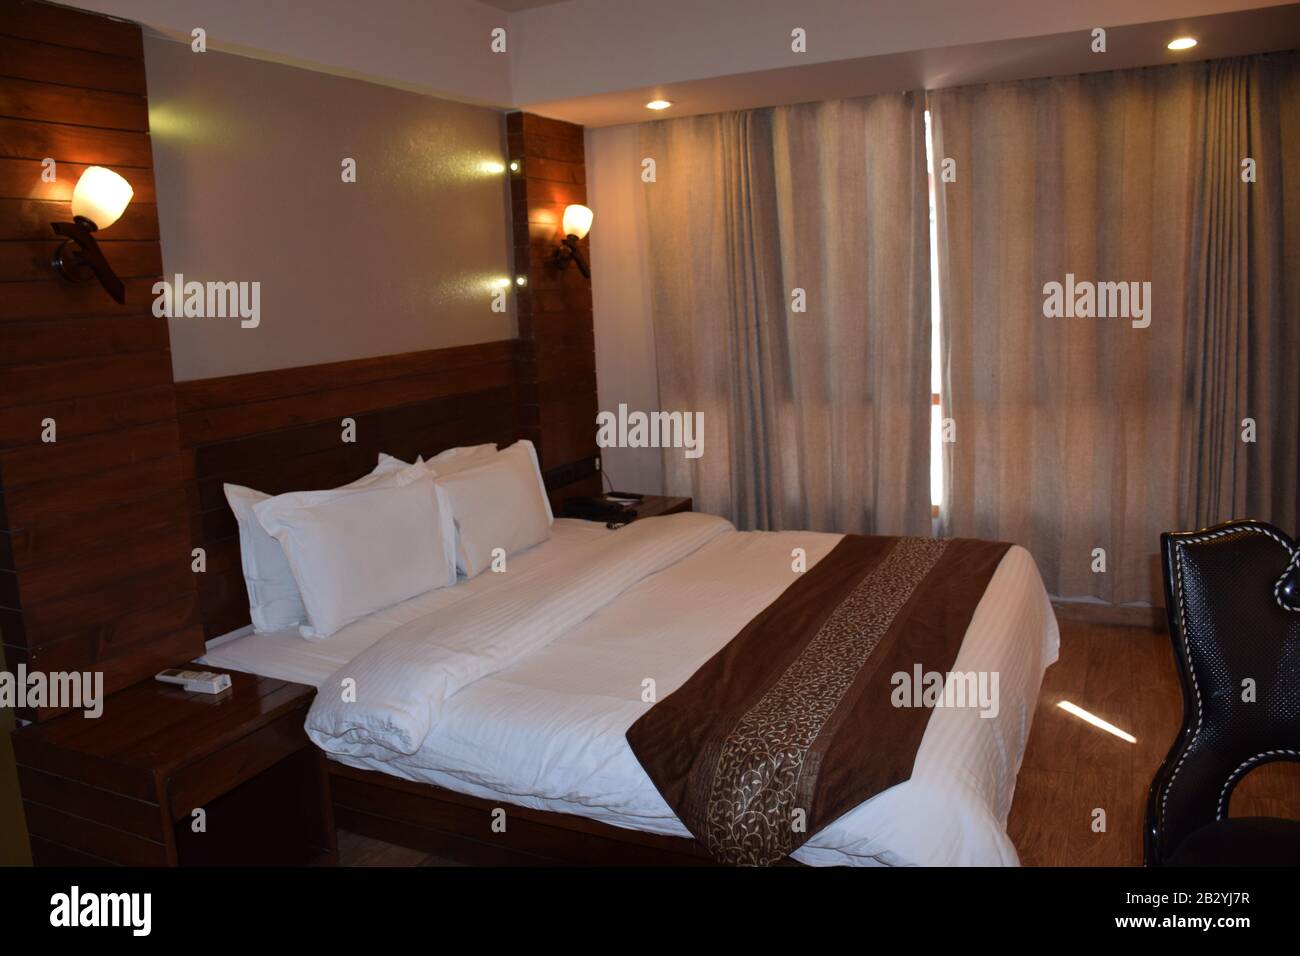 Standard hotel bed room with light on Stock Photo